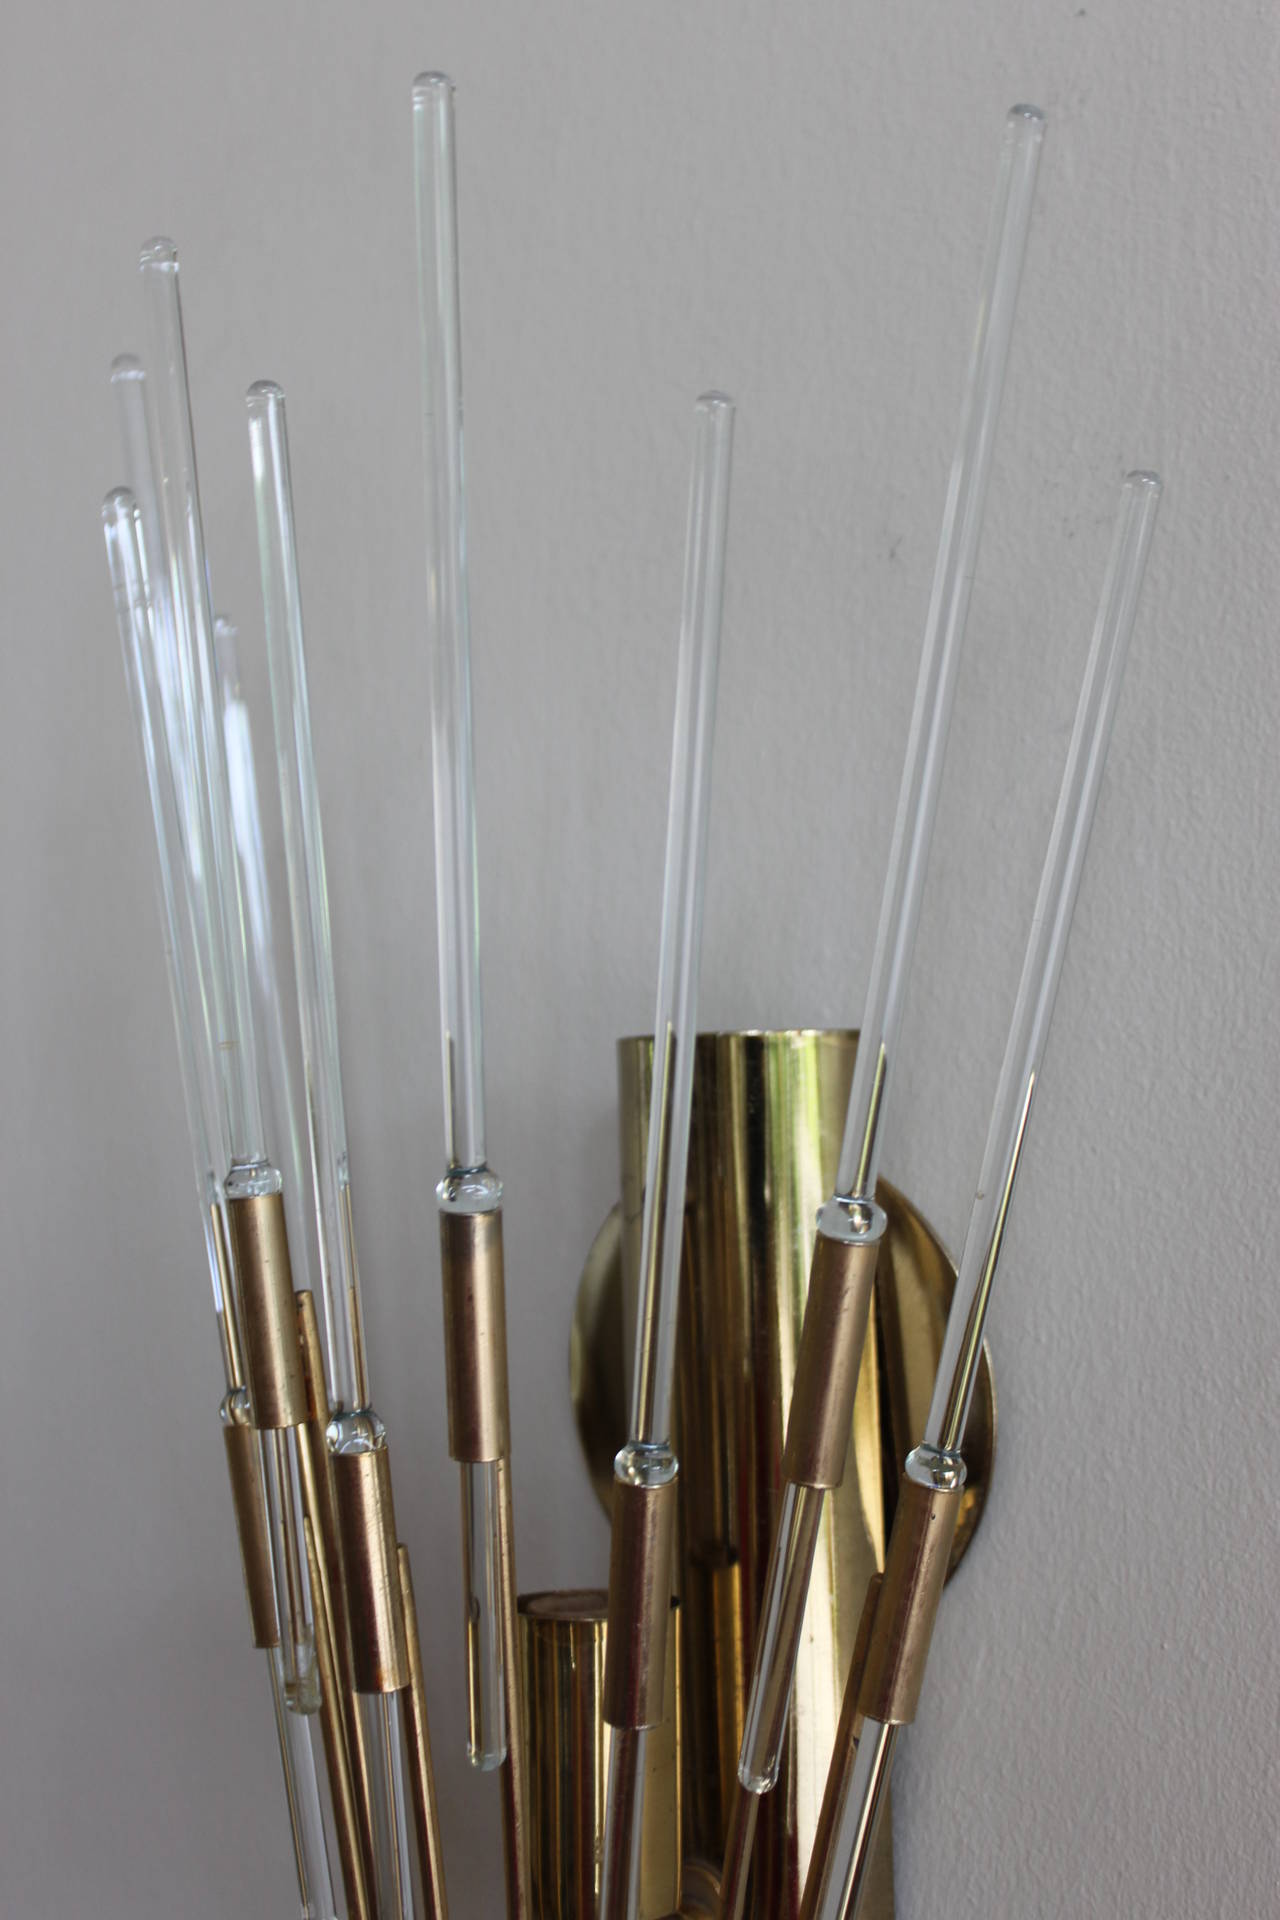 Mid 20th century Italian wall sconce in brass with glass rods.   The fixture holds a single small bulb.